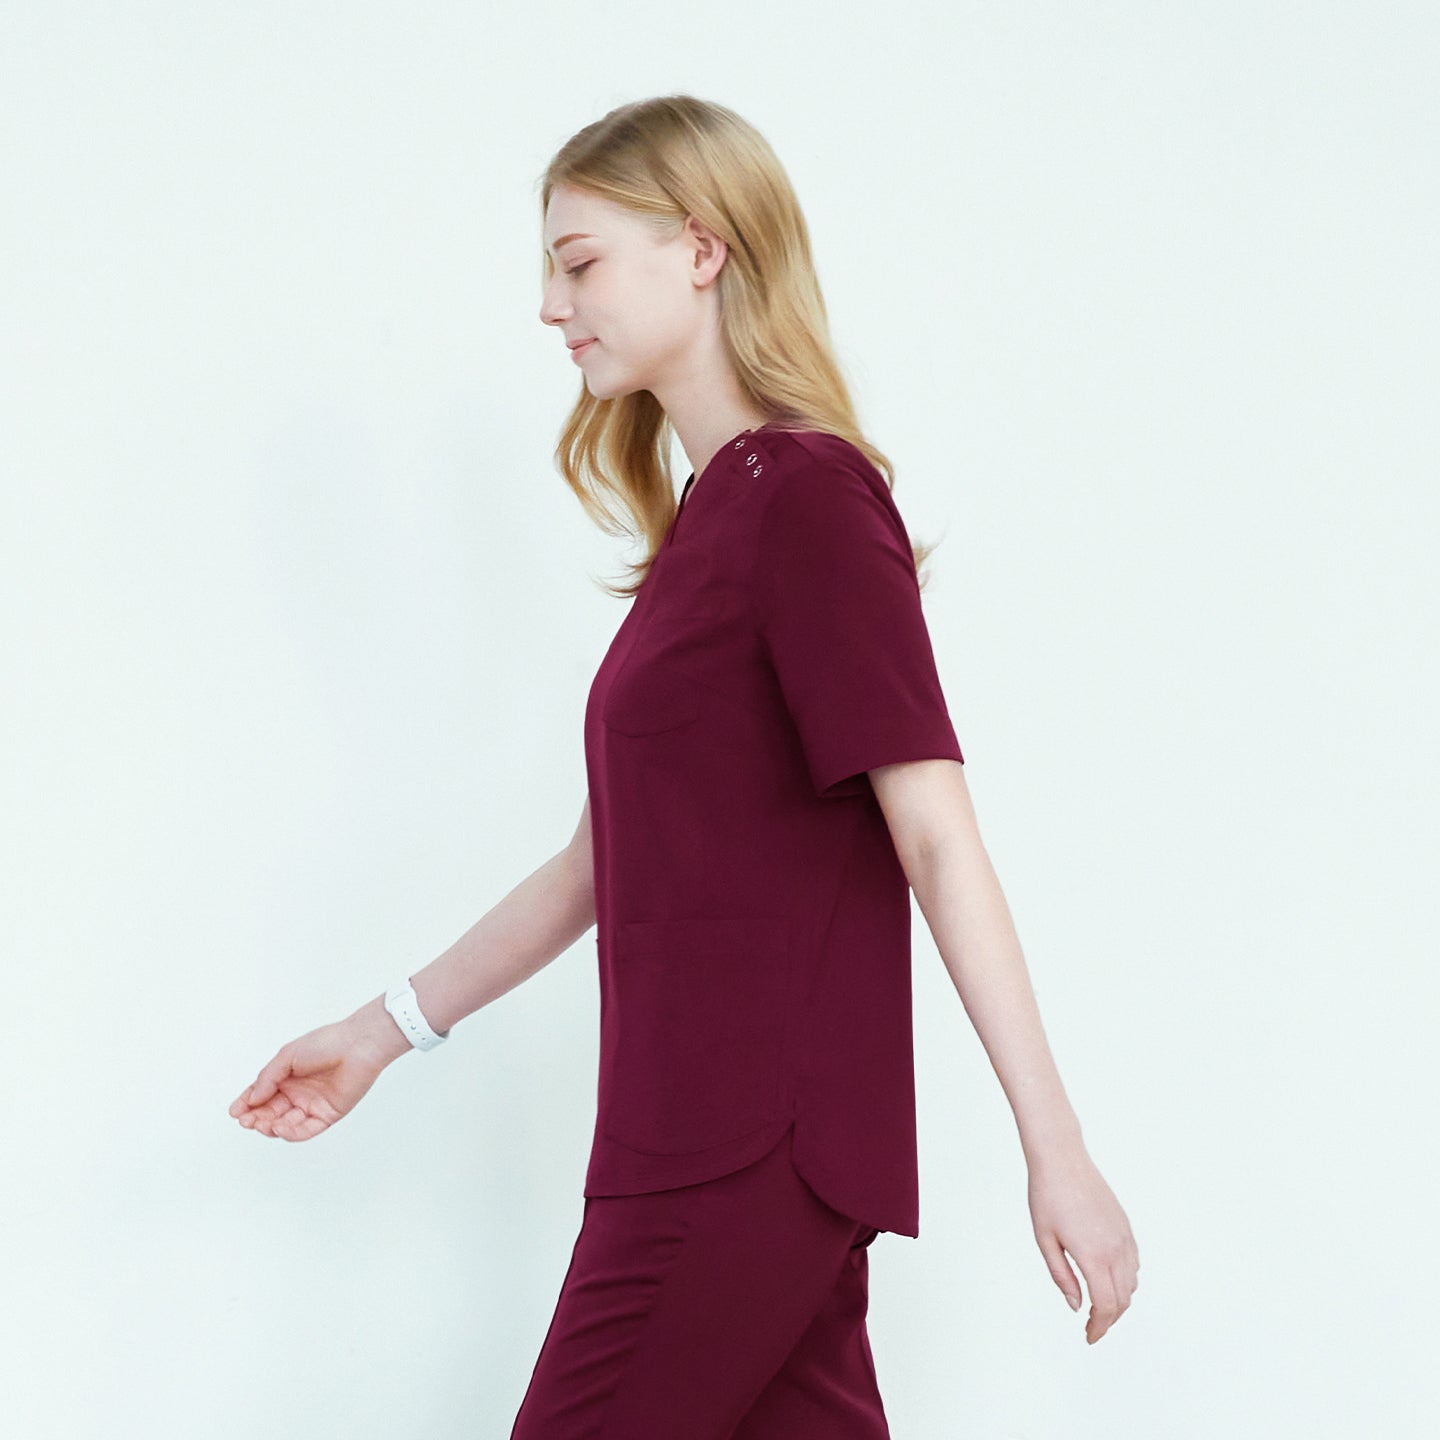 Woman walking sideways in 3-button scrub top with two front pockets and matching pants,Burgundy